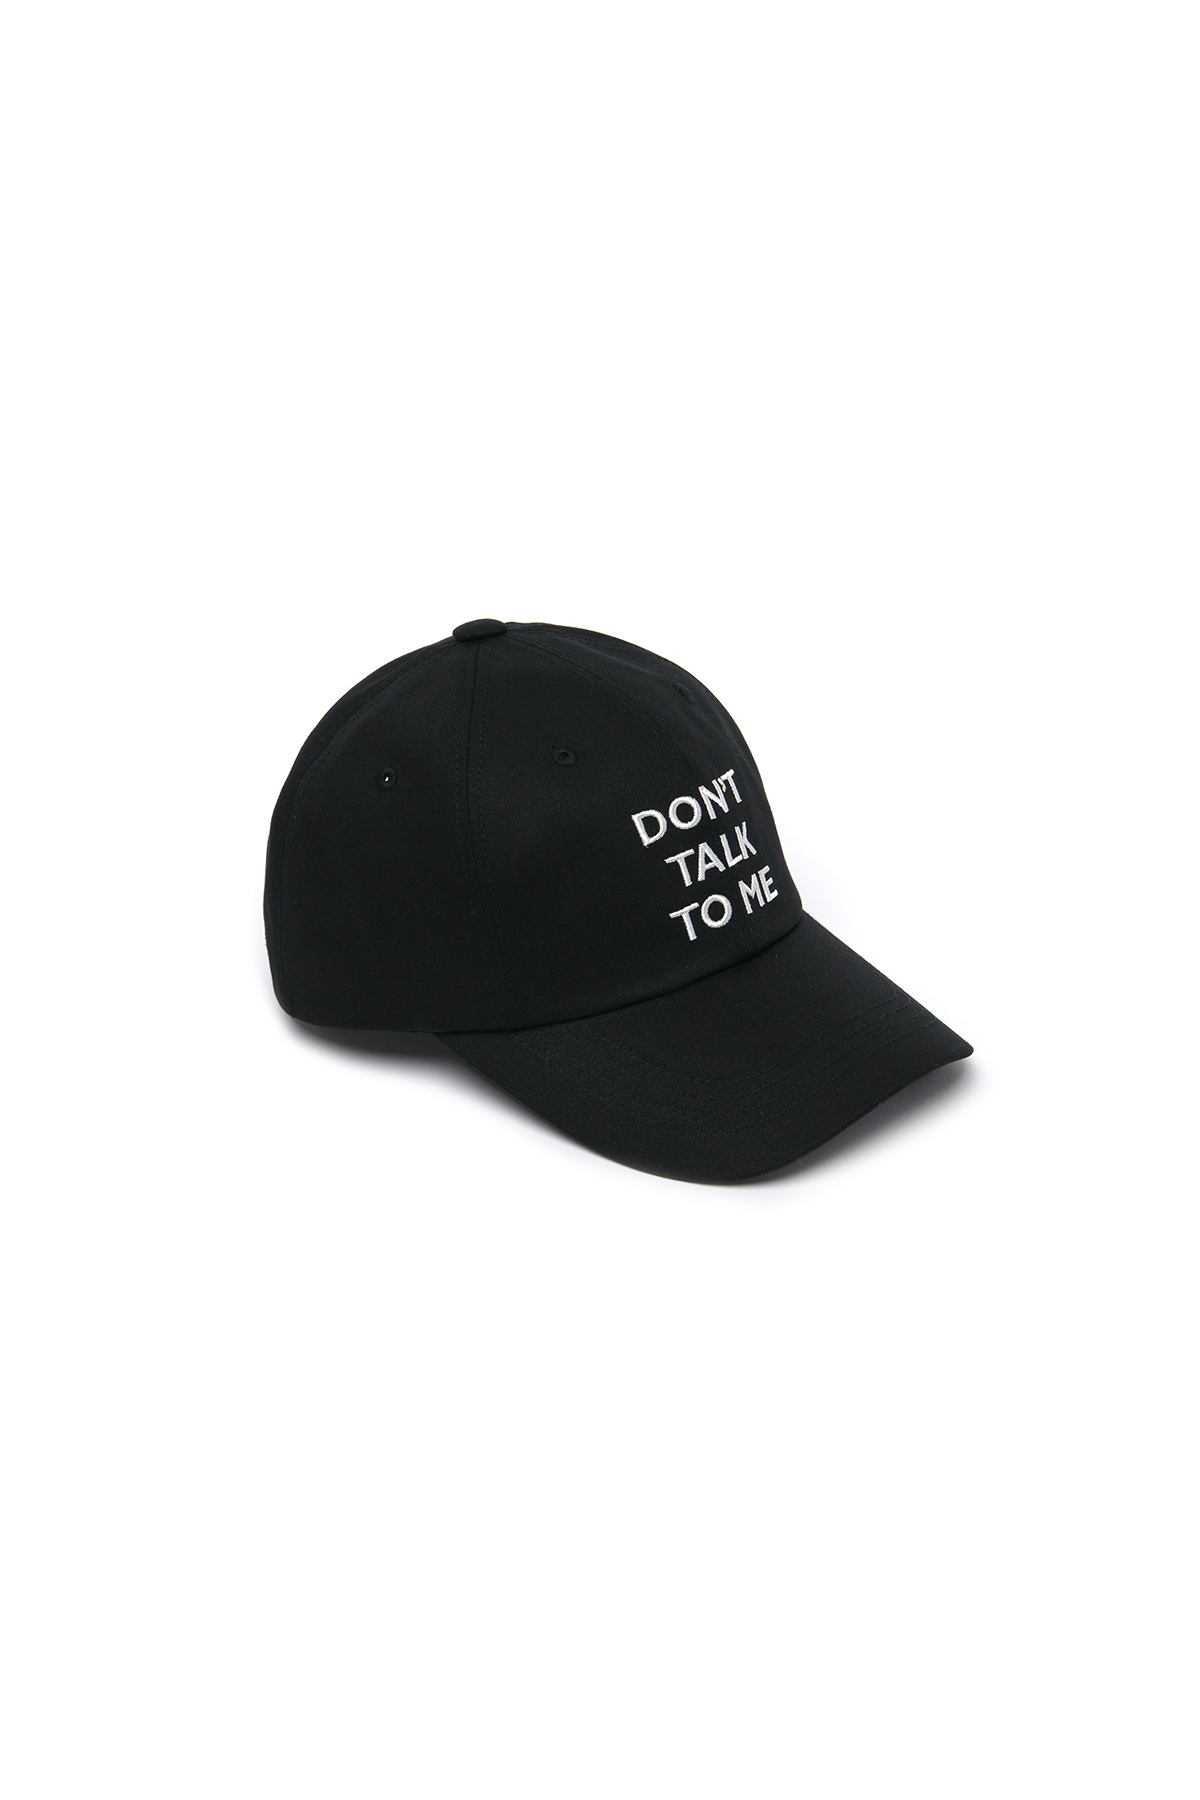 DONT TALK TO ME EMBROIDERED BALL CAP BLACK